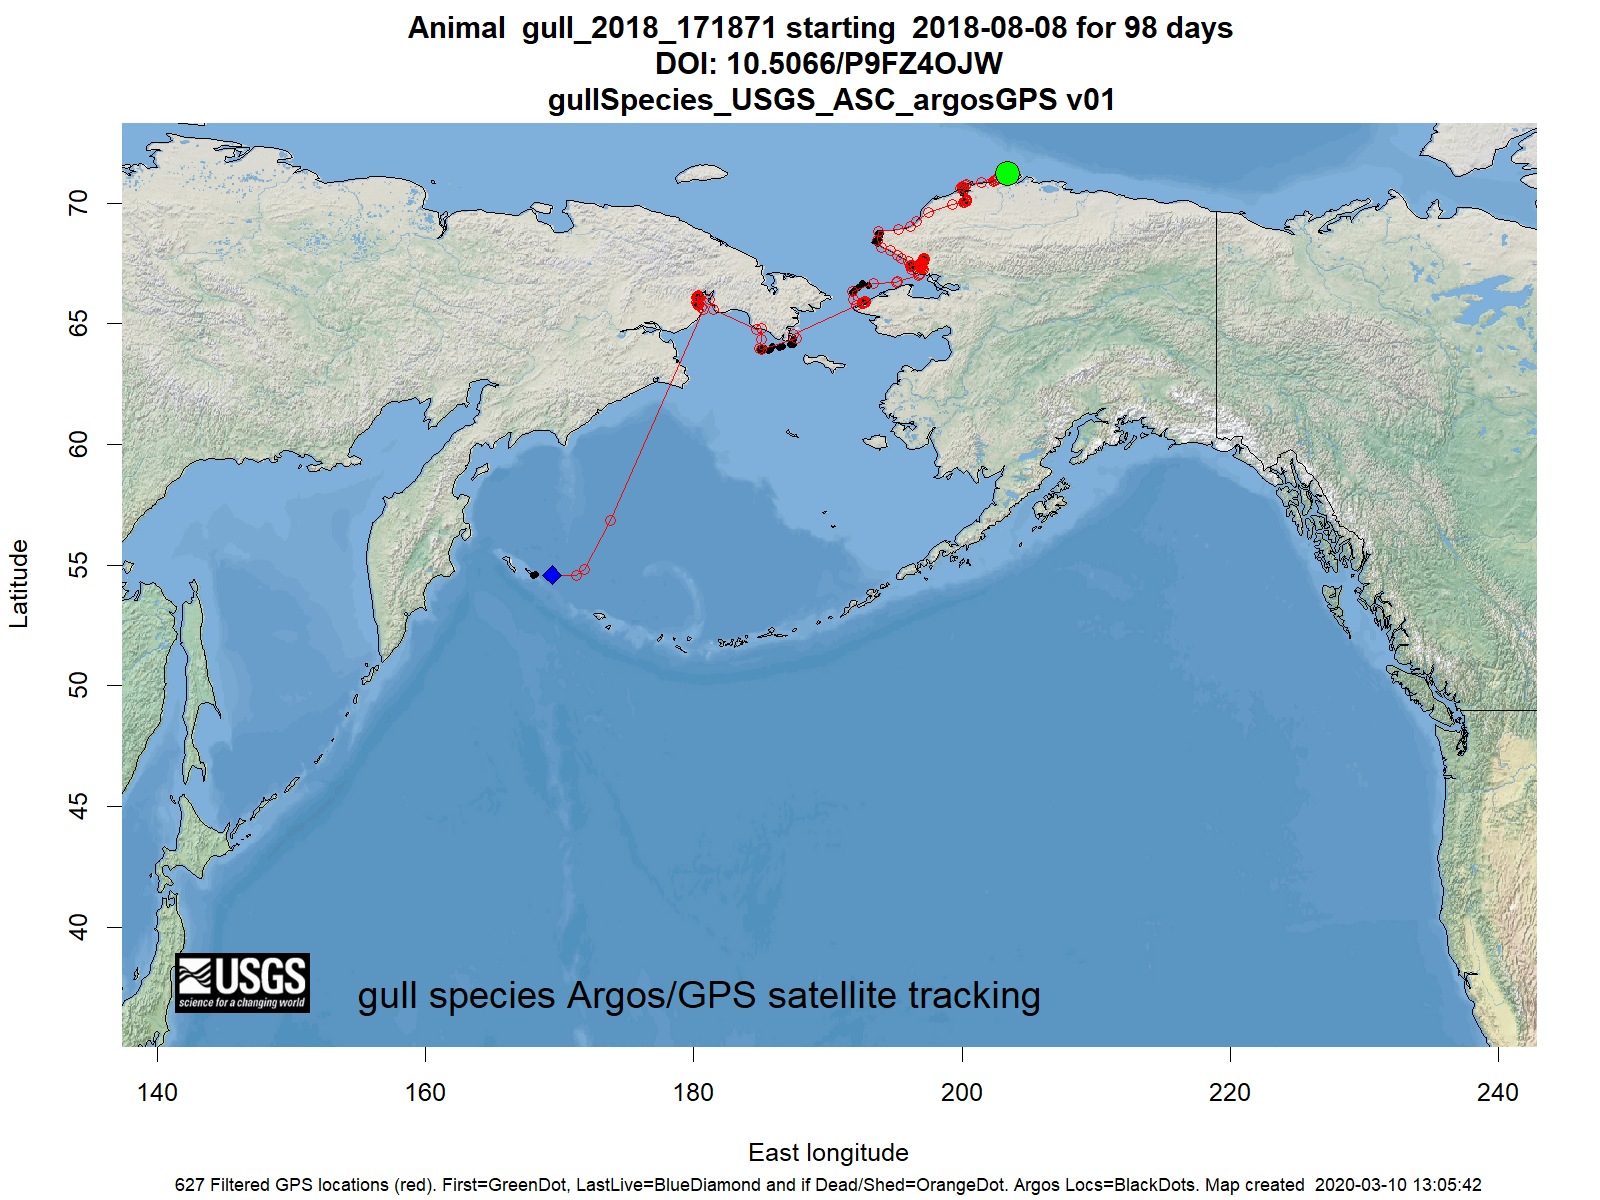 Tracking map for species gull_2018_171871